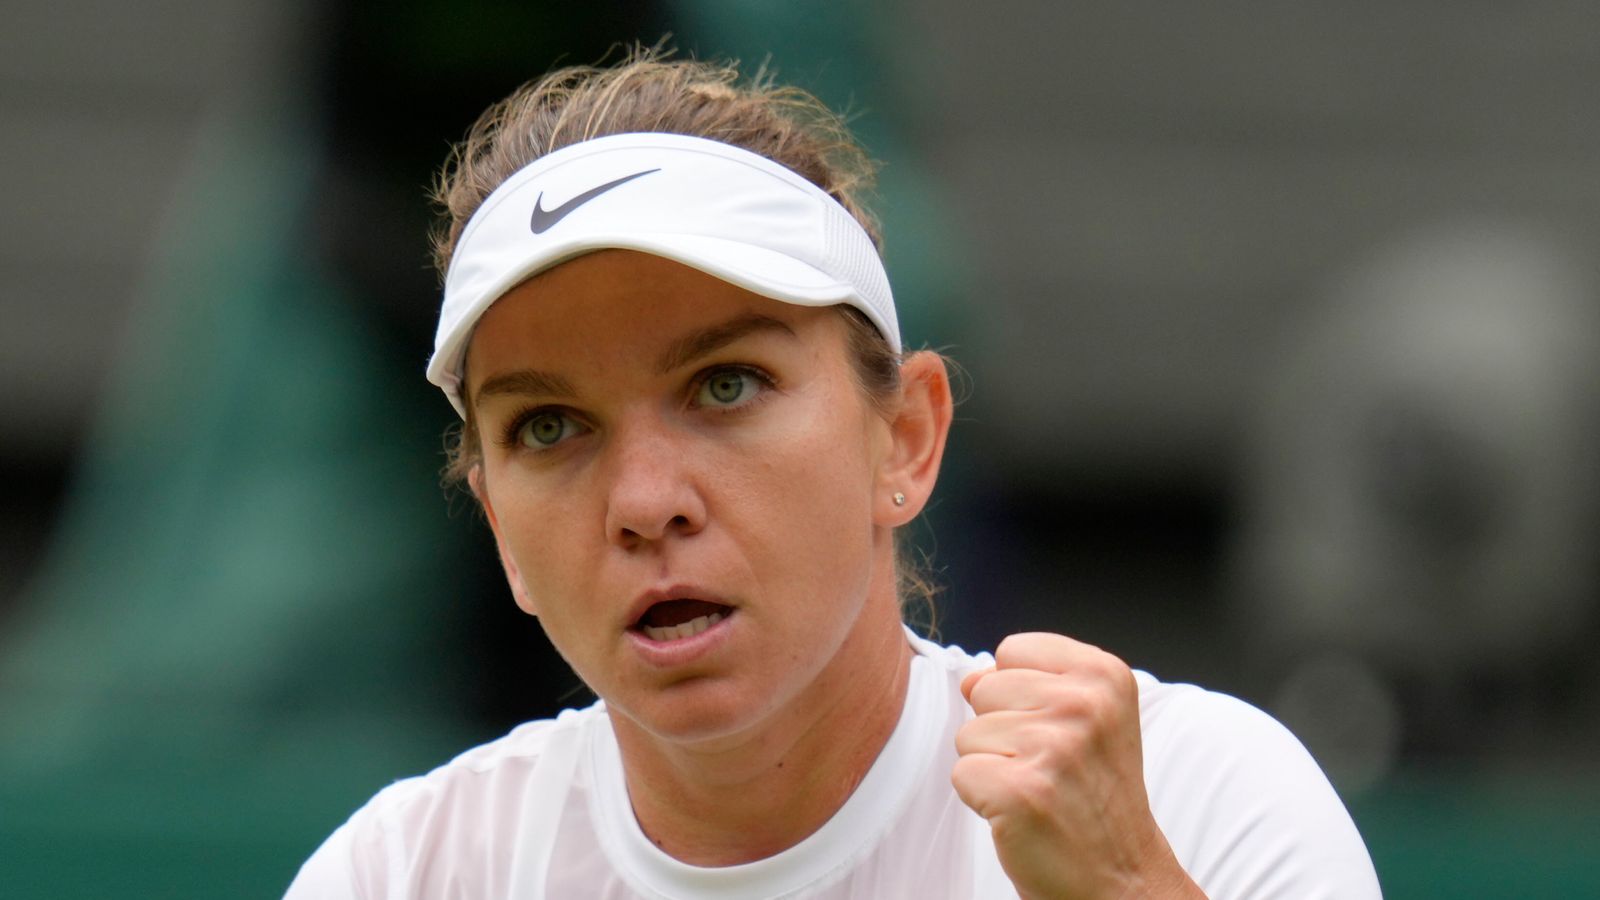 Simona Halep: Tennis star launches £8m claim against Quantum Nutrition, who she blames for her drugs ban